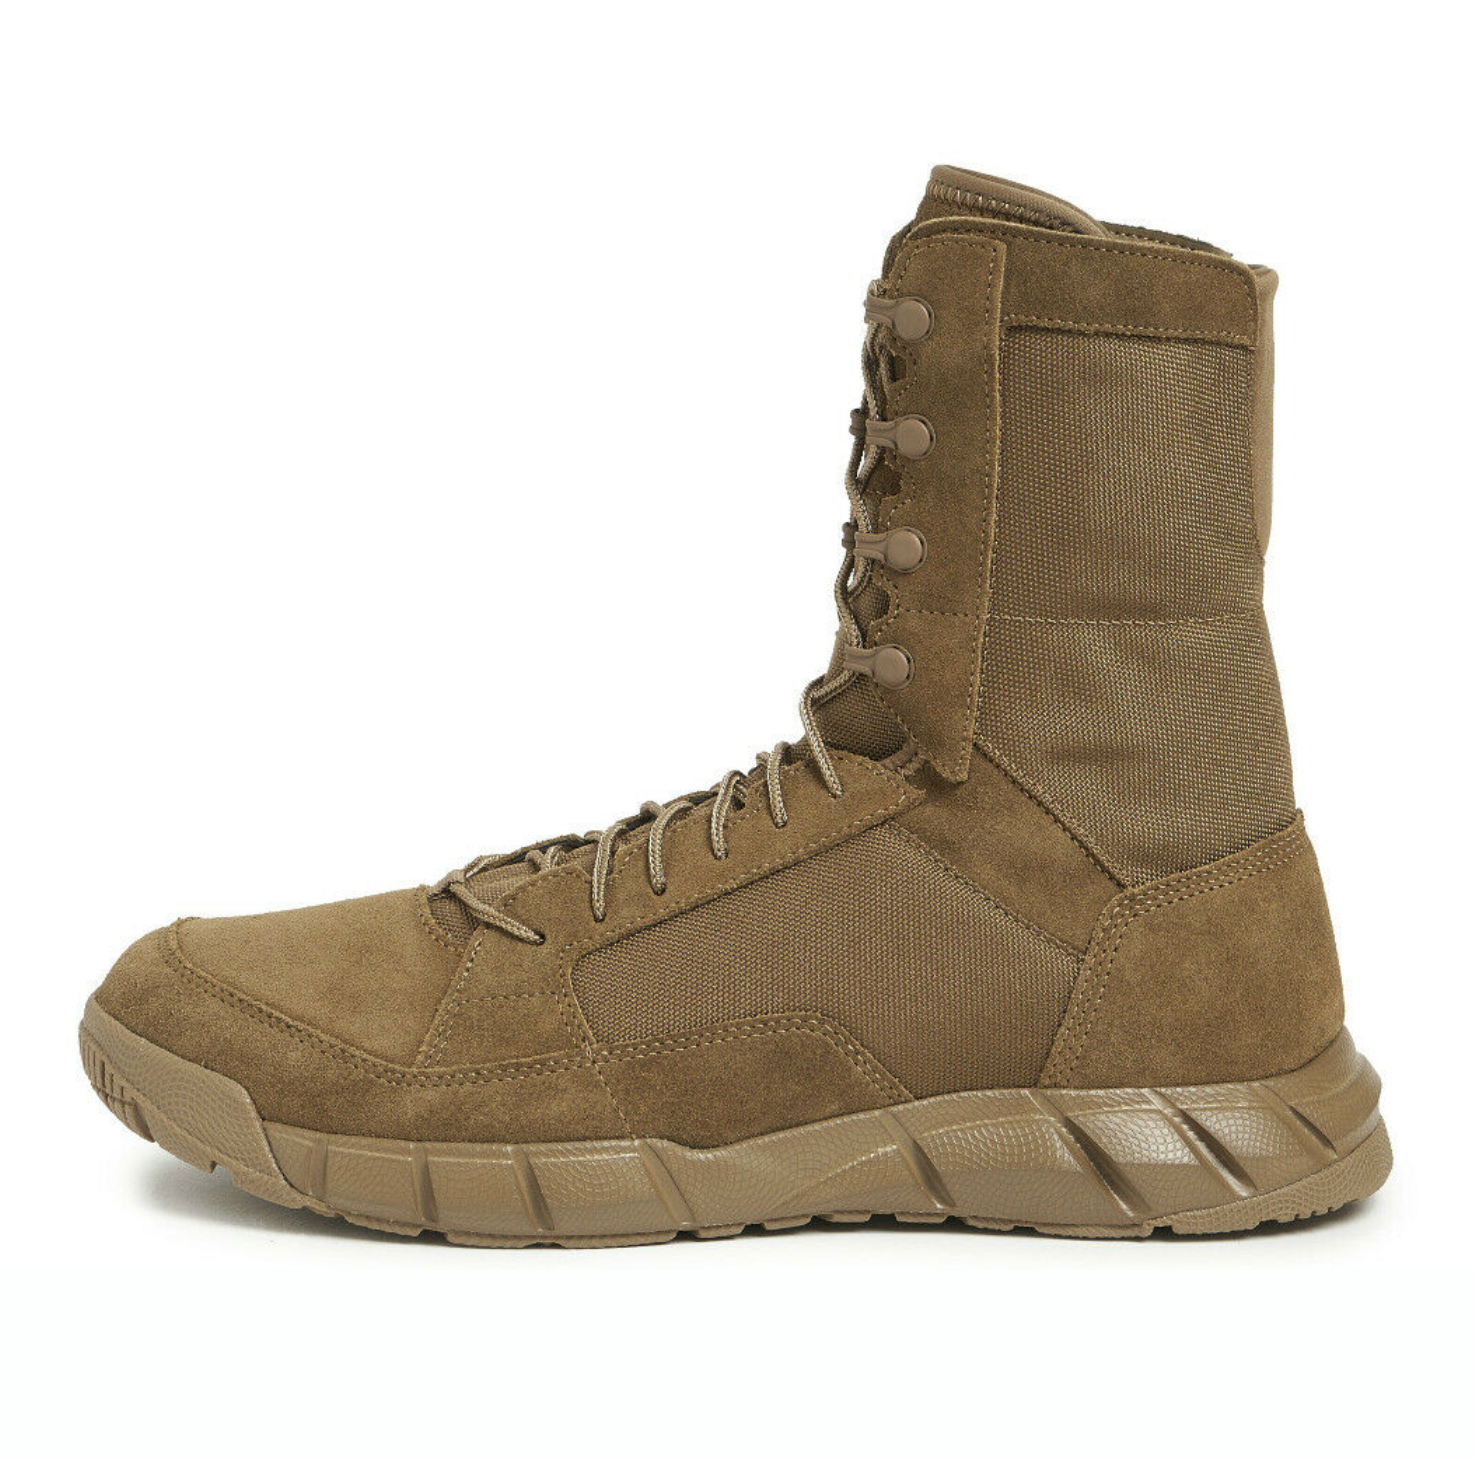 ornament Tolkning endnu engang Oakley Light Assault 2 Coyote Leather Boots 11188-86W – Combat Footwear